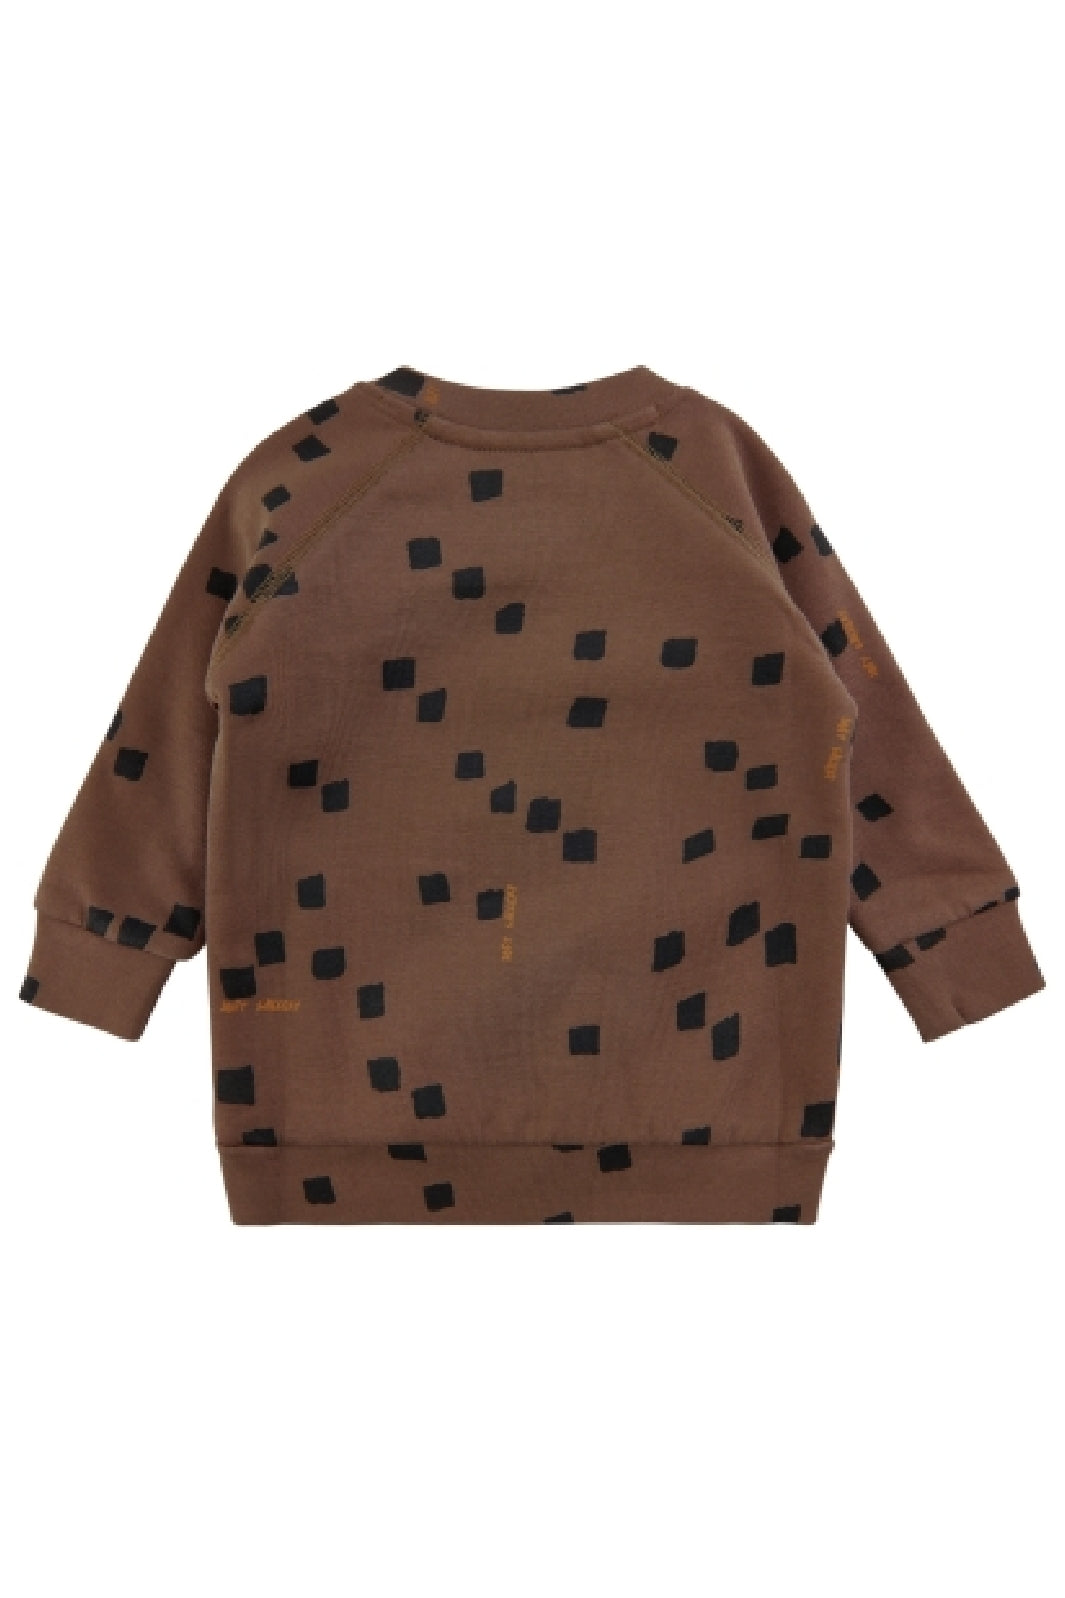 Soft Gallery - SGalexi Squares Sweatshirt - Cocoa Brown 